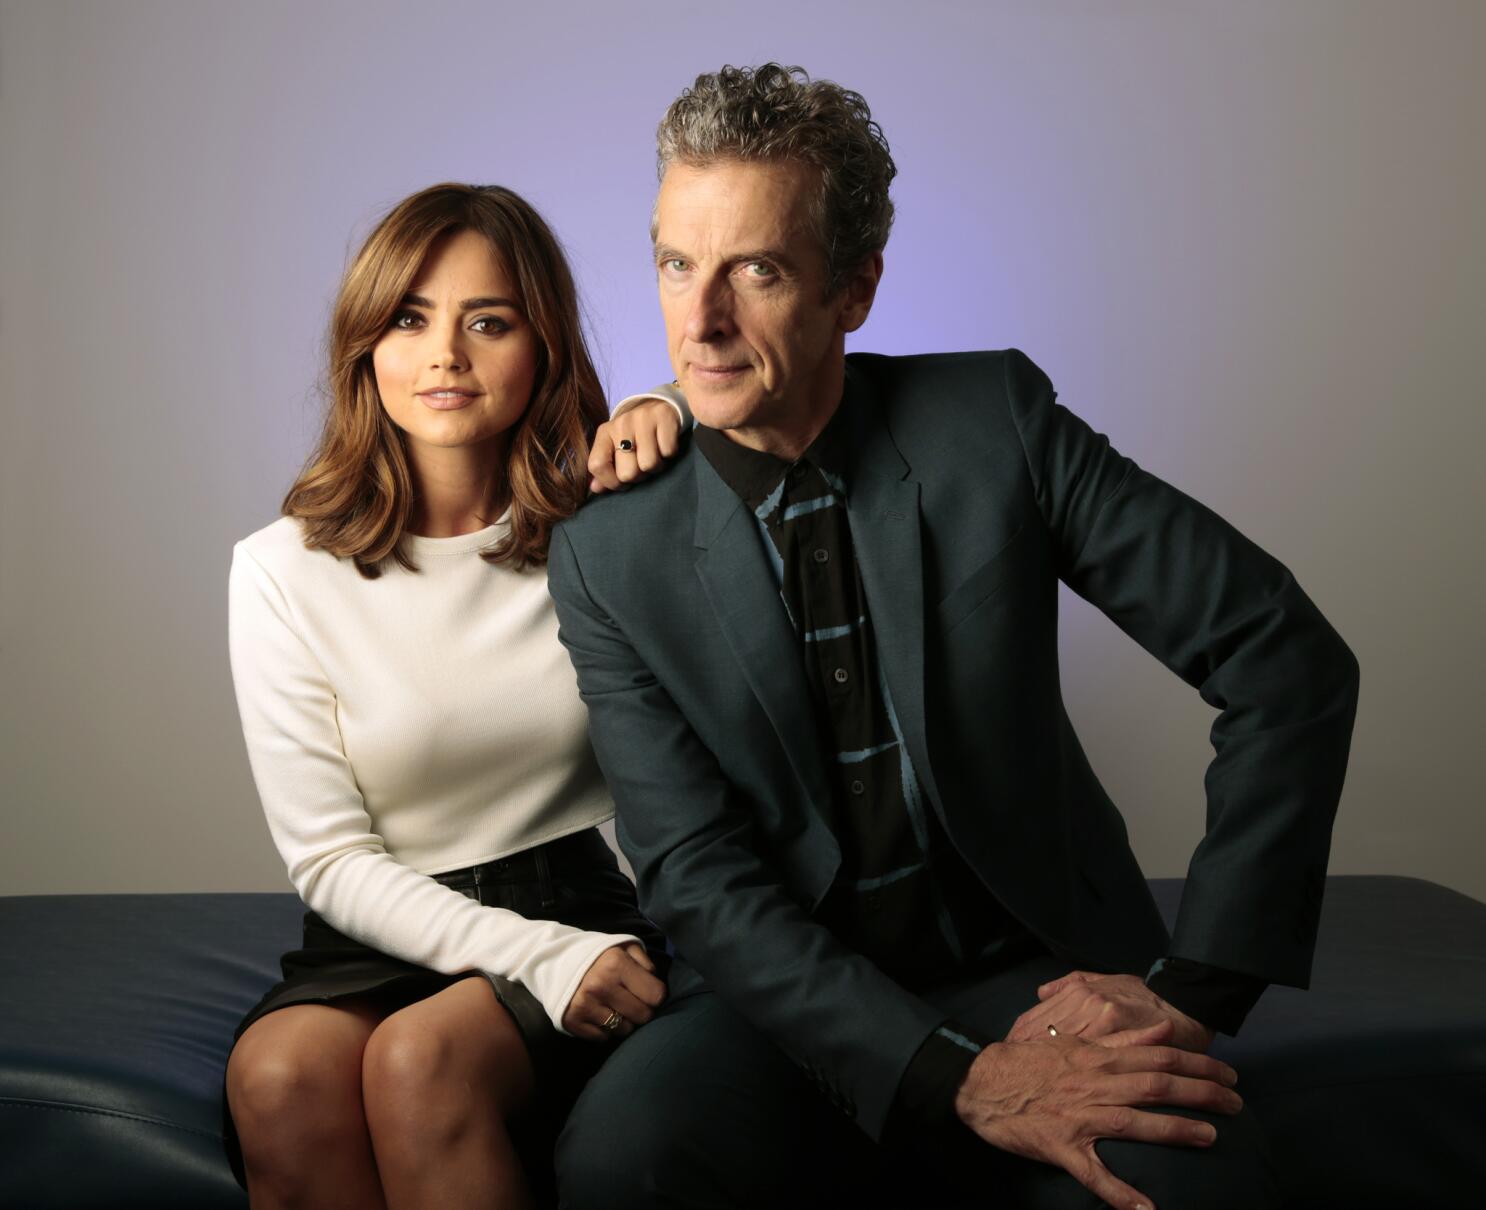 Peter Capaldi: The Doctor who is almost in - Los Angeles Times